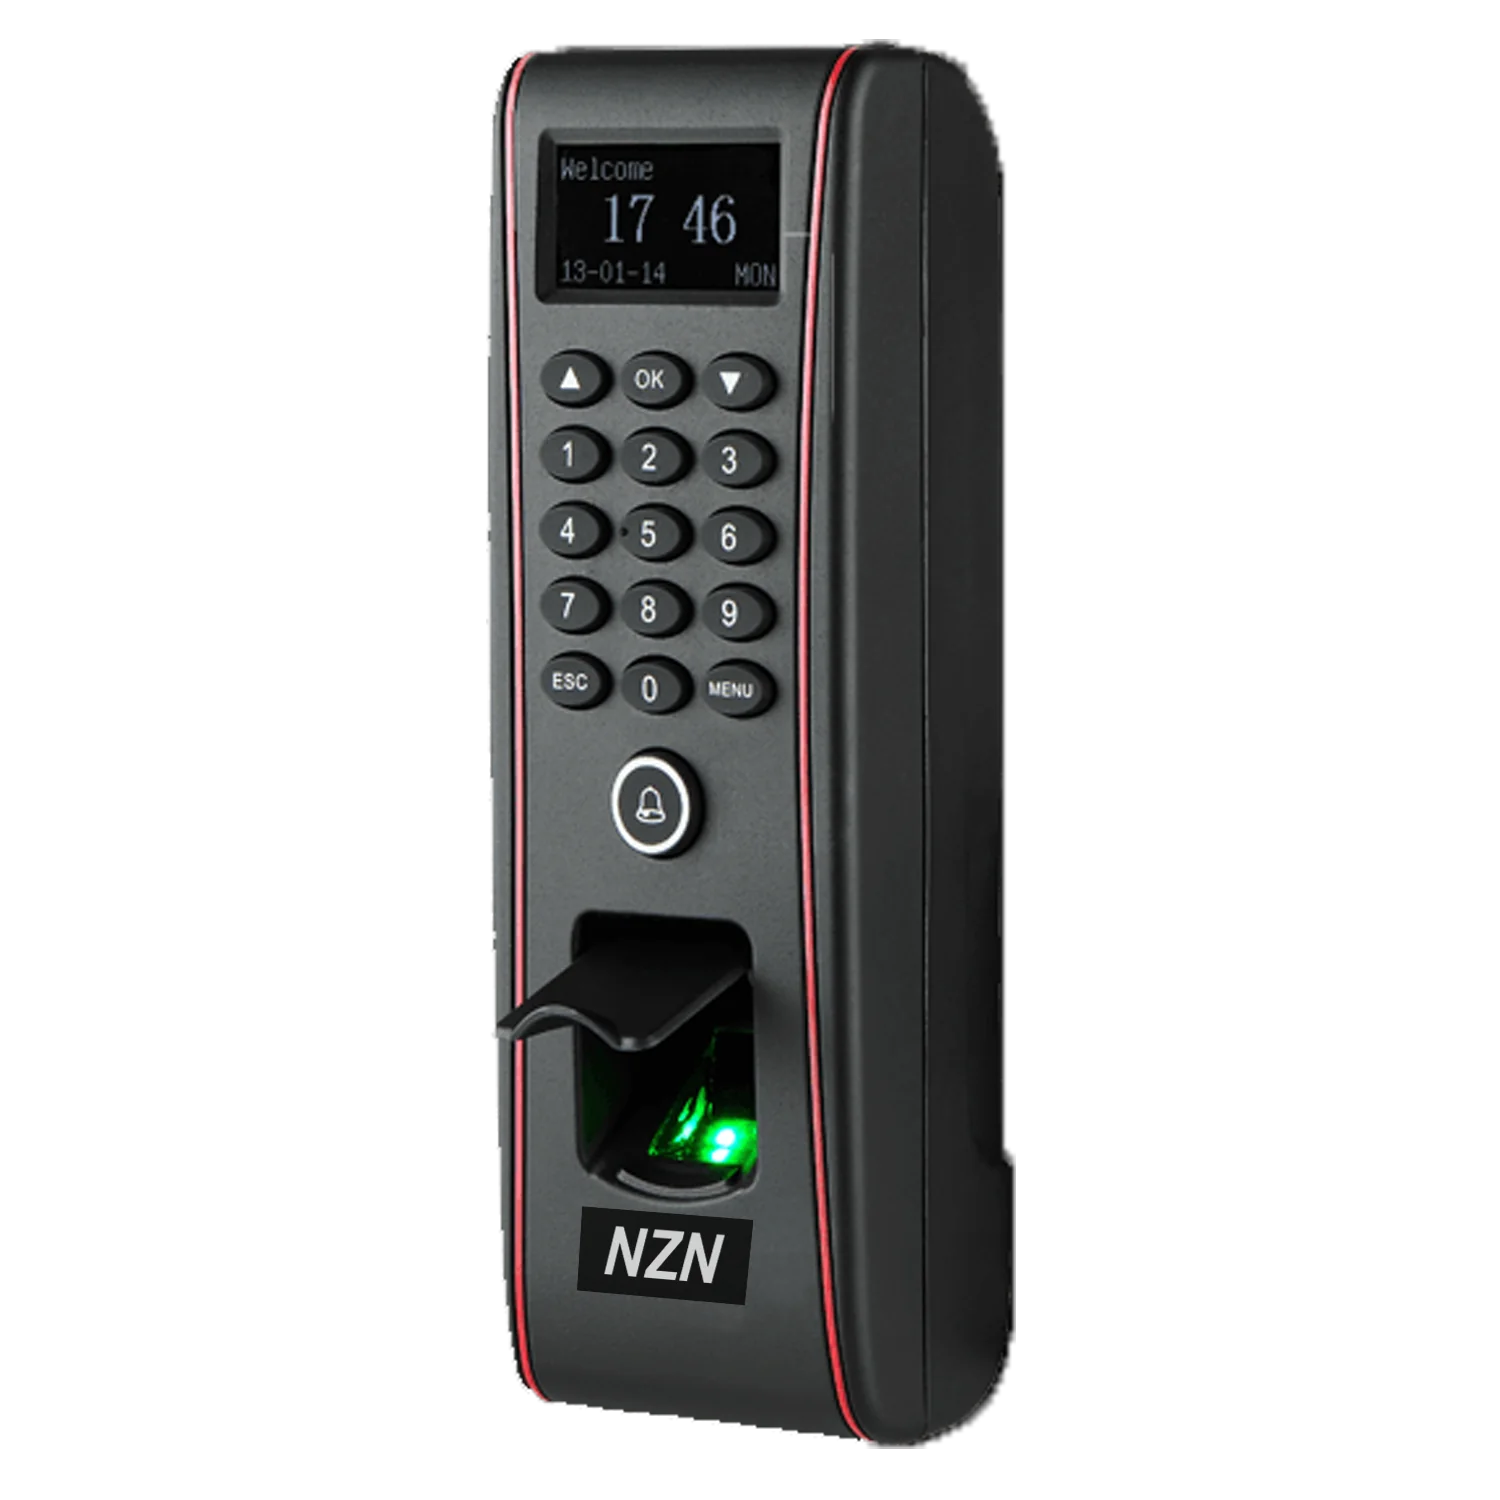 Door Access System Singapore - Home Security System's Merits and Demerits